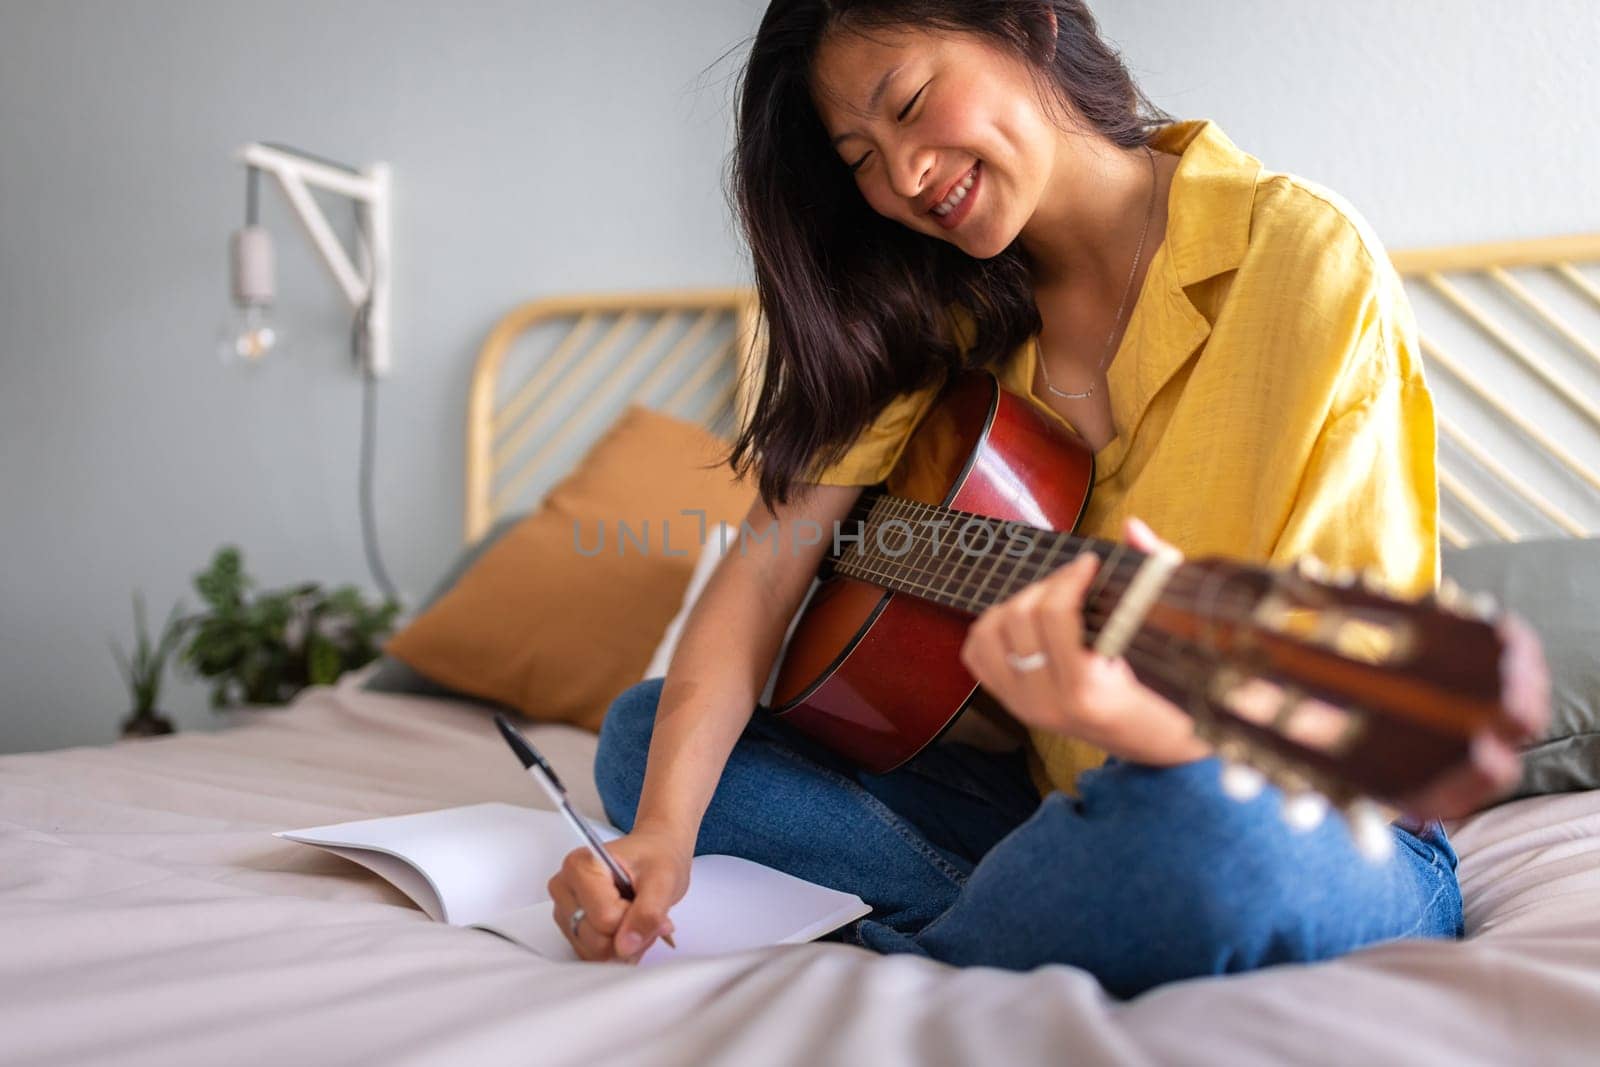 Young Asian female song writer composing song inner bedroom. Writing lyrics. Playing acoustic guitar. Musician by Hoverstock